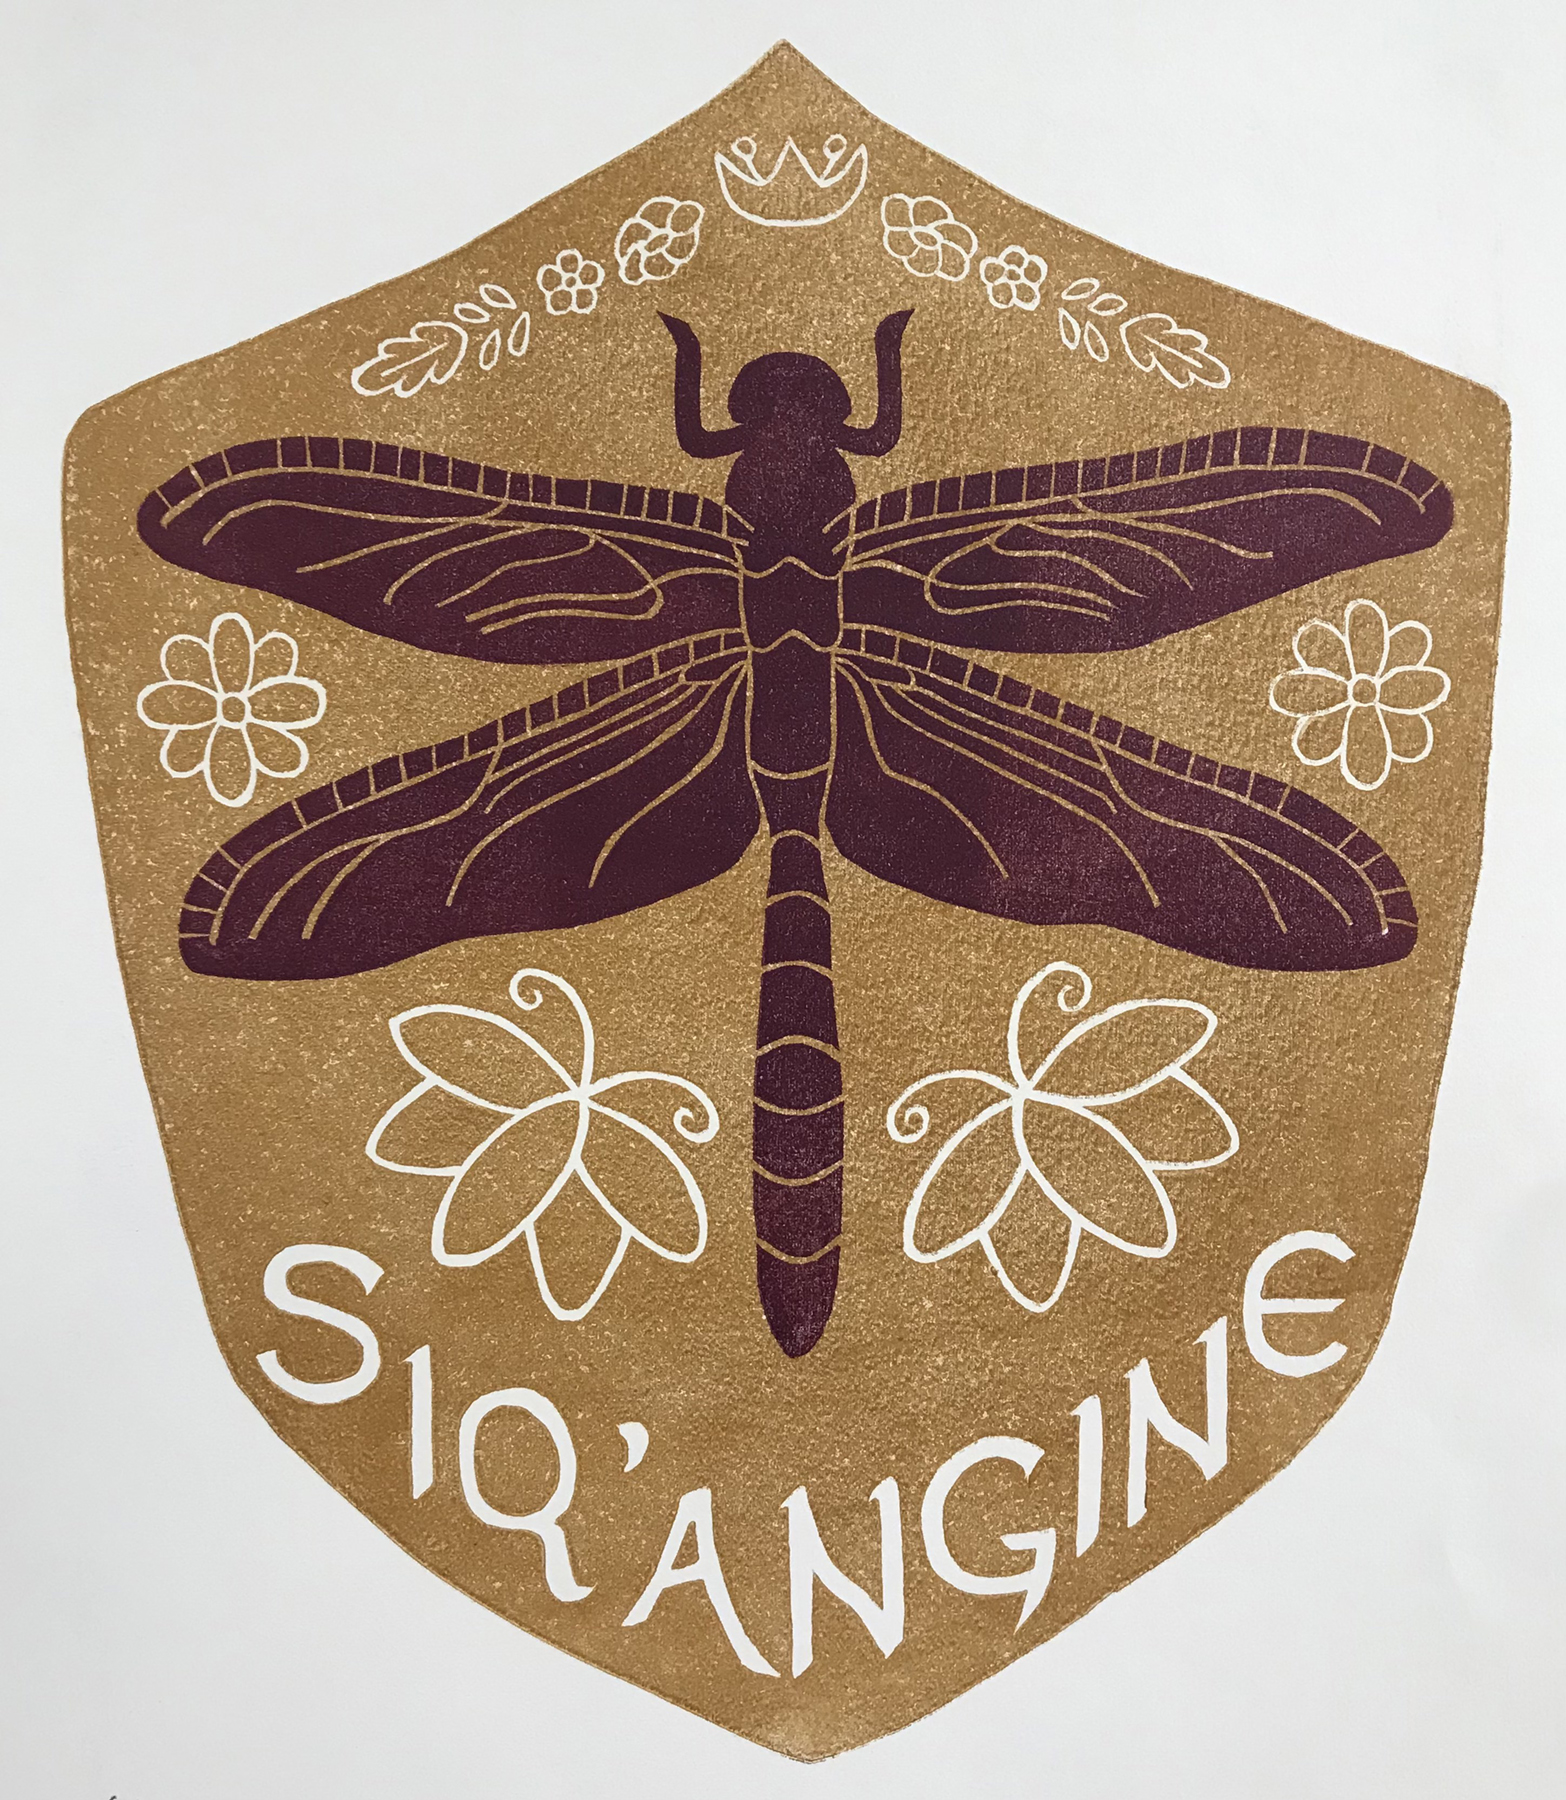 Two block relief print of a yellow shield with a maroon dragonfly and the word Siq'angine at the bottom, courtesy of the artist